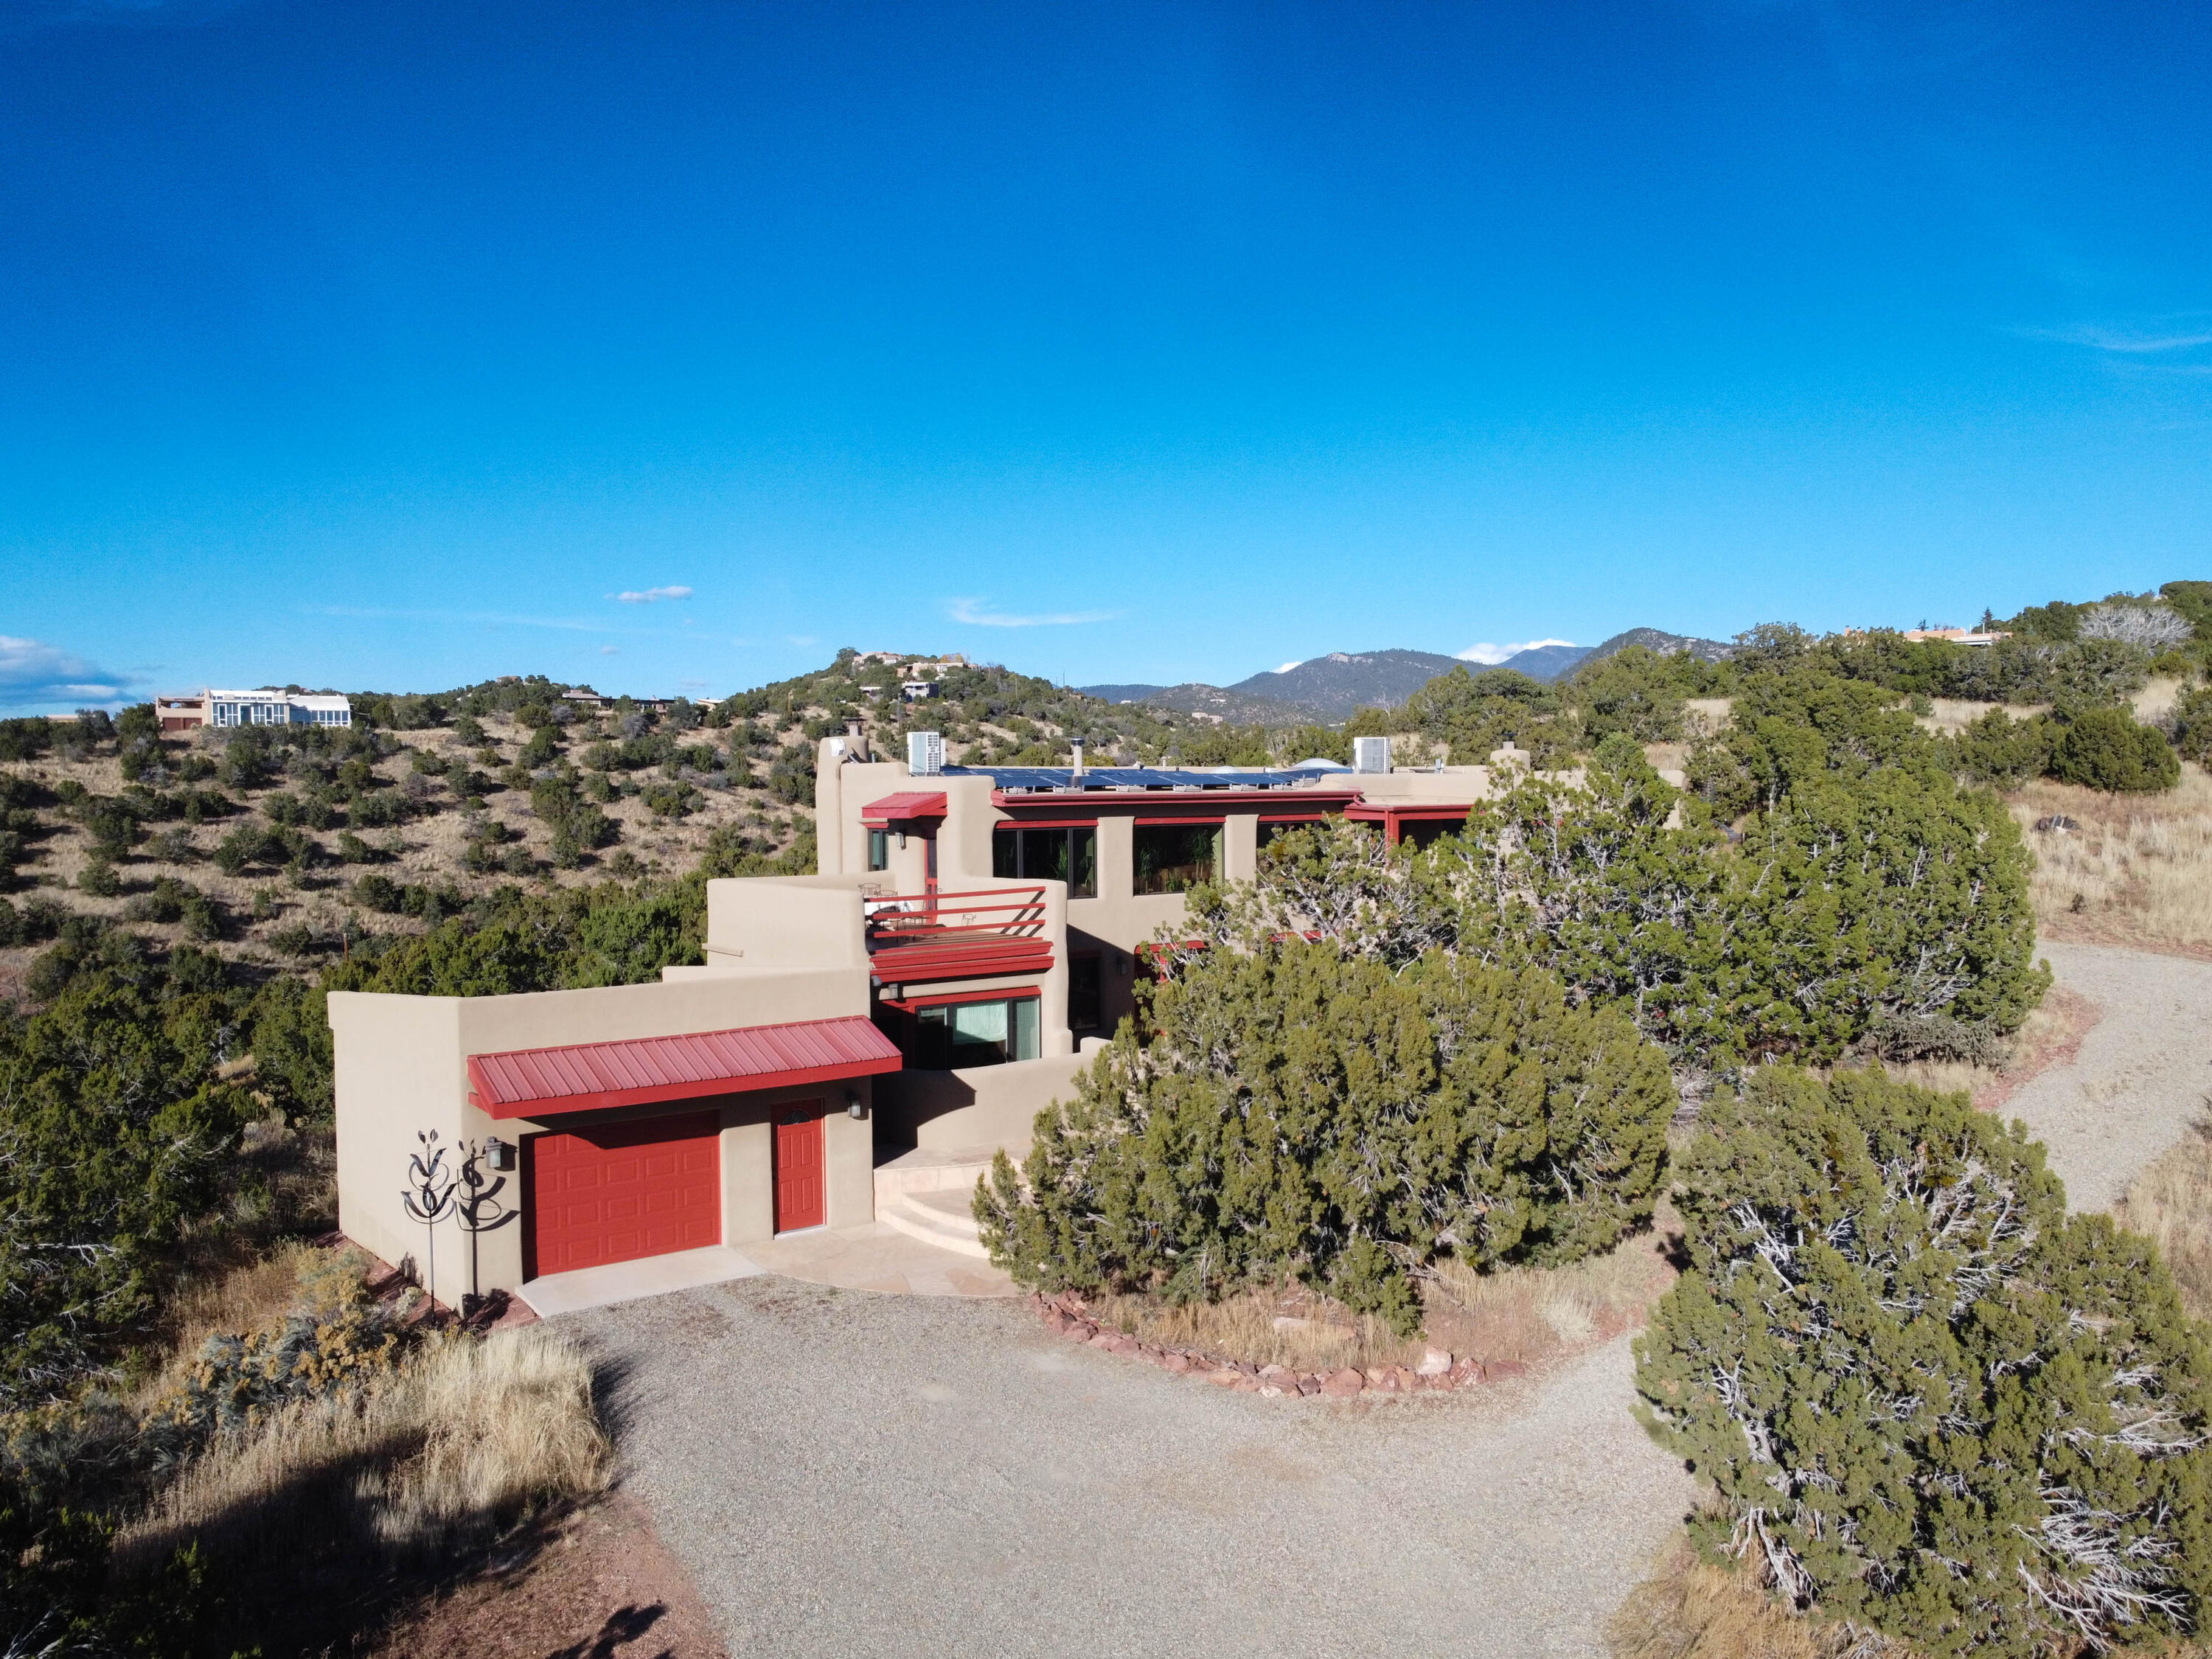 Majestically situated on Santa Fe's southeast foothills atop your own prestigious lot on over 5 acres  in Seton Village is this artistic custom adobe southwestern estate. These are next level views that immerse you in the Enchantment of New Mexico.  This home has character, style, and flare with an extensive list of upgrades. Featuring remodeled chefs' kitchen, updated gorgeous bathrooms, designer touches throughout, newer roof, stucco, windows and more. The passive and active owned solar design makes the home ultra-efficient coupled with updated heating and ventilation system and a tankless water heater. Large, 1.5 garage could be workshop or home gym. Beaming with pride of ownership do not miss an opportunity to live in one of Santa Fe's finest only 15 minutes to the famous Plaza